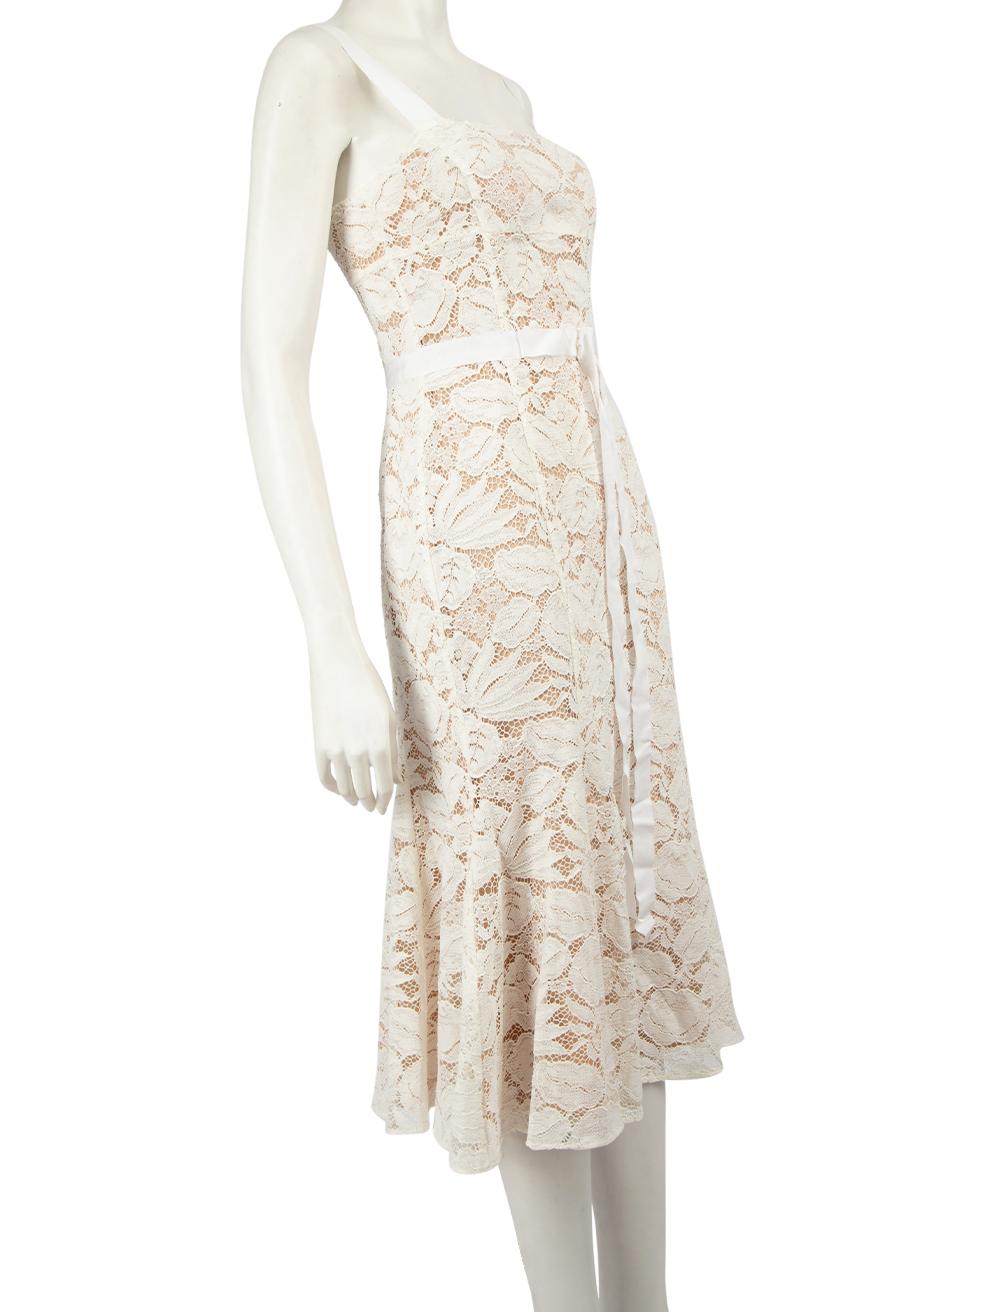 CONDITION is Never worn, with tags. No visible wear to the dress is evident. However, due to poor storage, there is a small discolouration to the front centre of the ribbon on this new Oscar de la Renta designer resale item.
 
 
 
 Details
 
 
